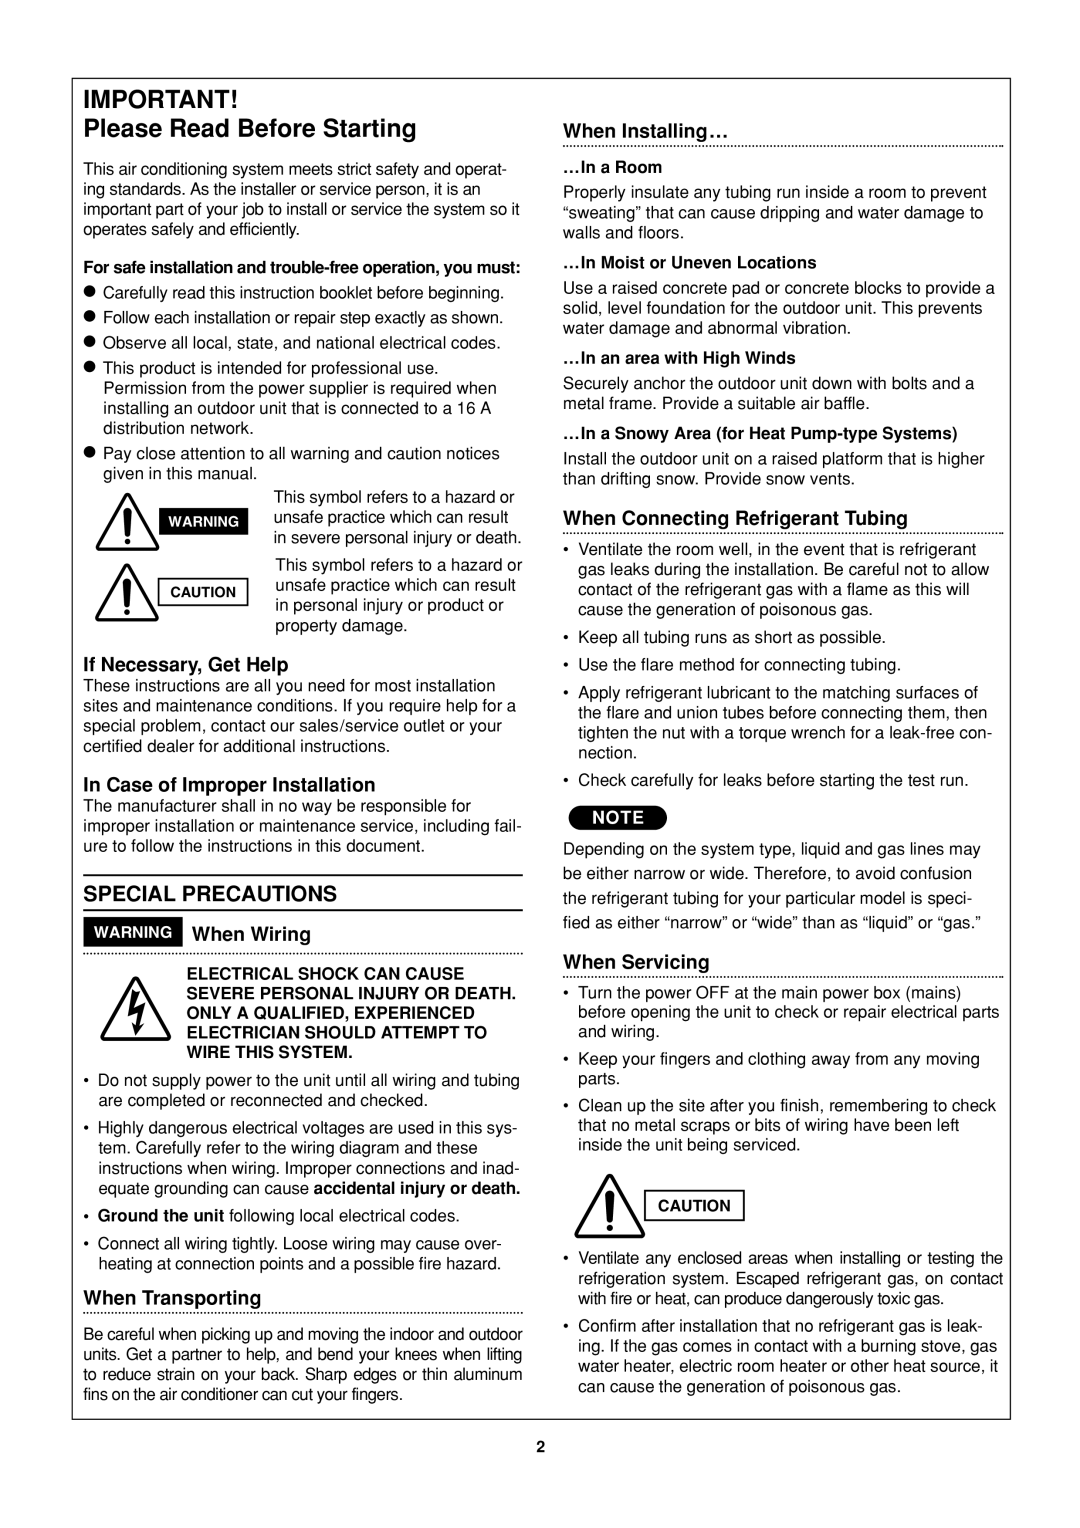 Sanyo SPW-XR254EH56 Please Read Before Starting, Special Precautions, If Necessary, Get Help, WARNING When Wiring 